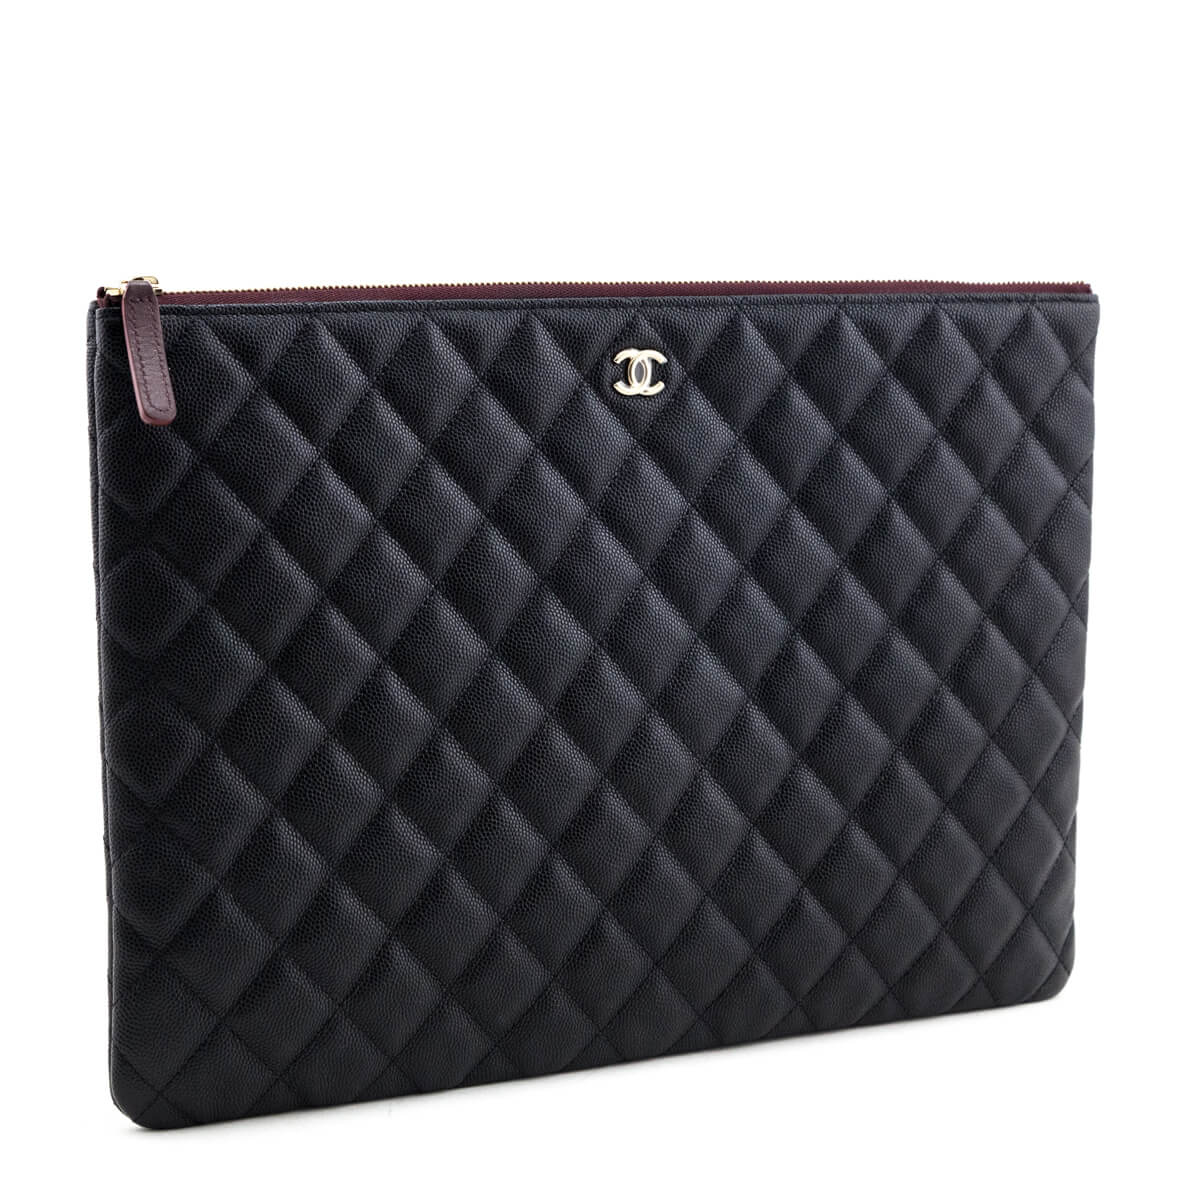 Chanel Black Quilted Caviar Large Classic Pouch - Love that Bag etc - Preowned Authentic Designer Handbags & Preloved Fashions